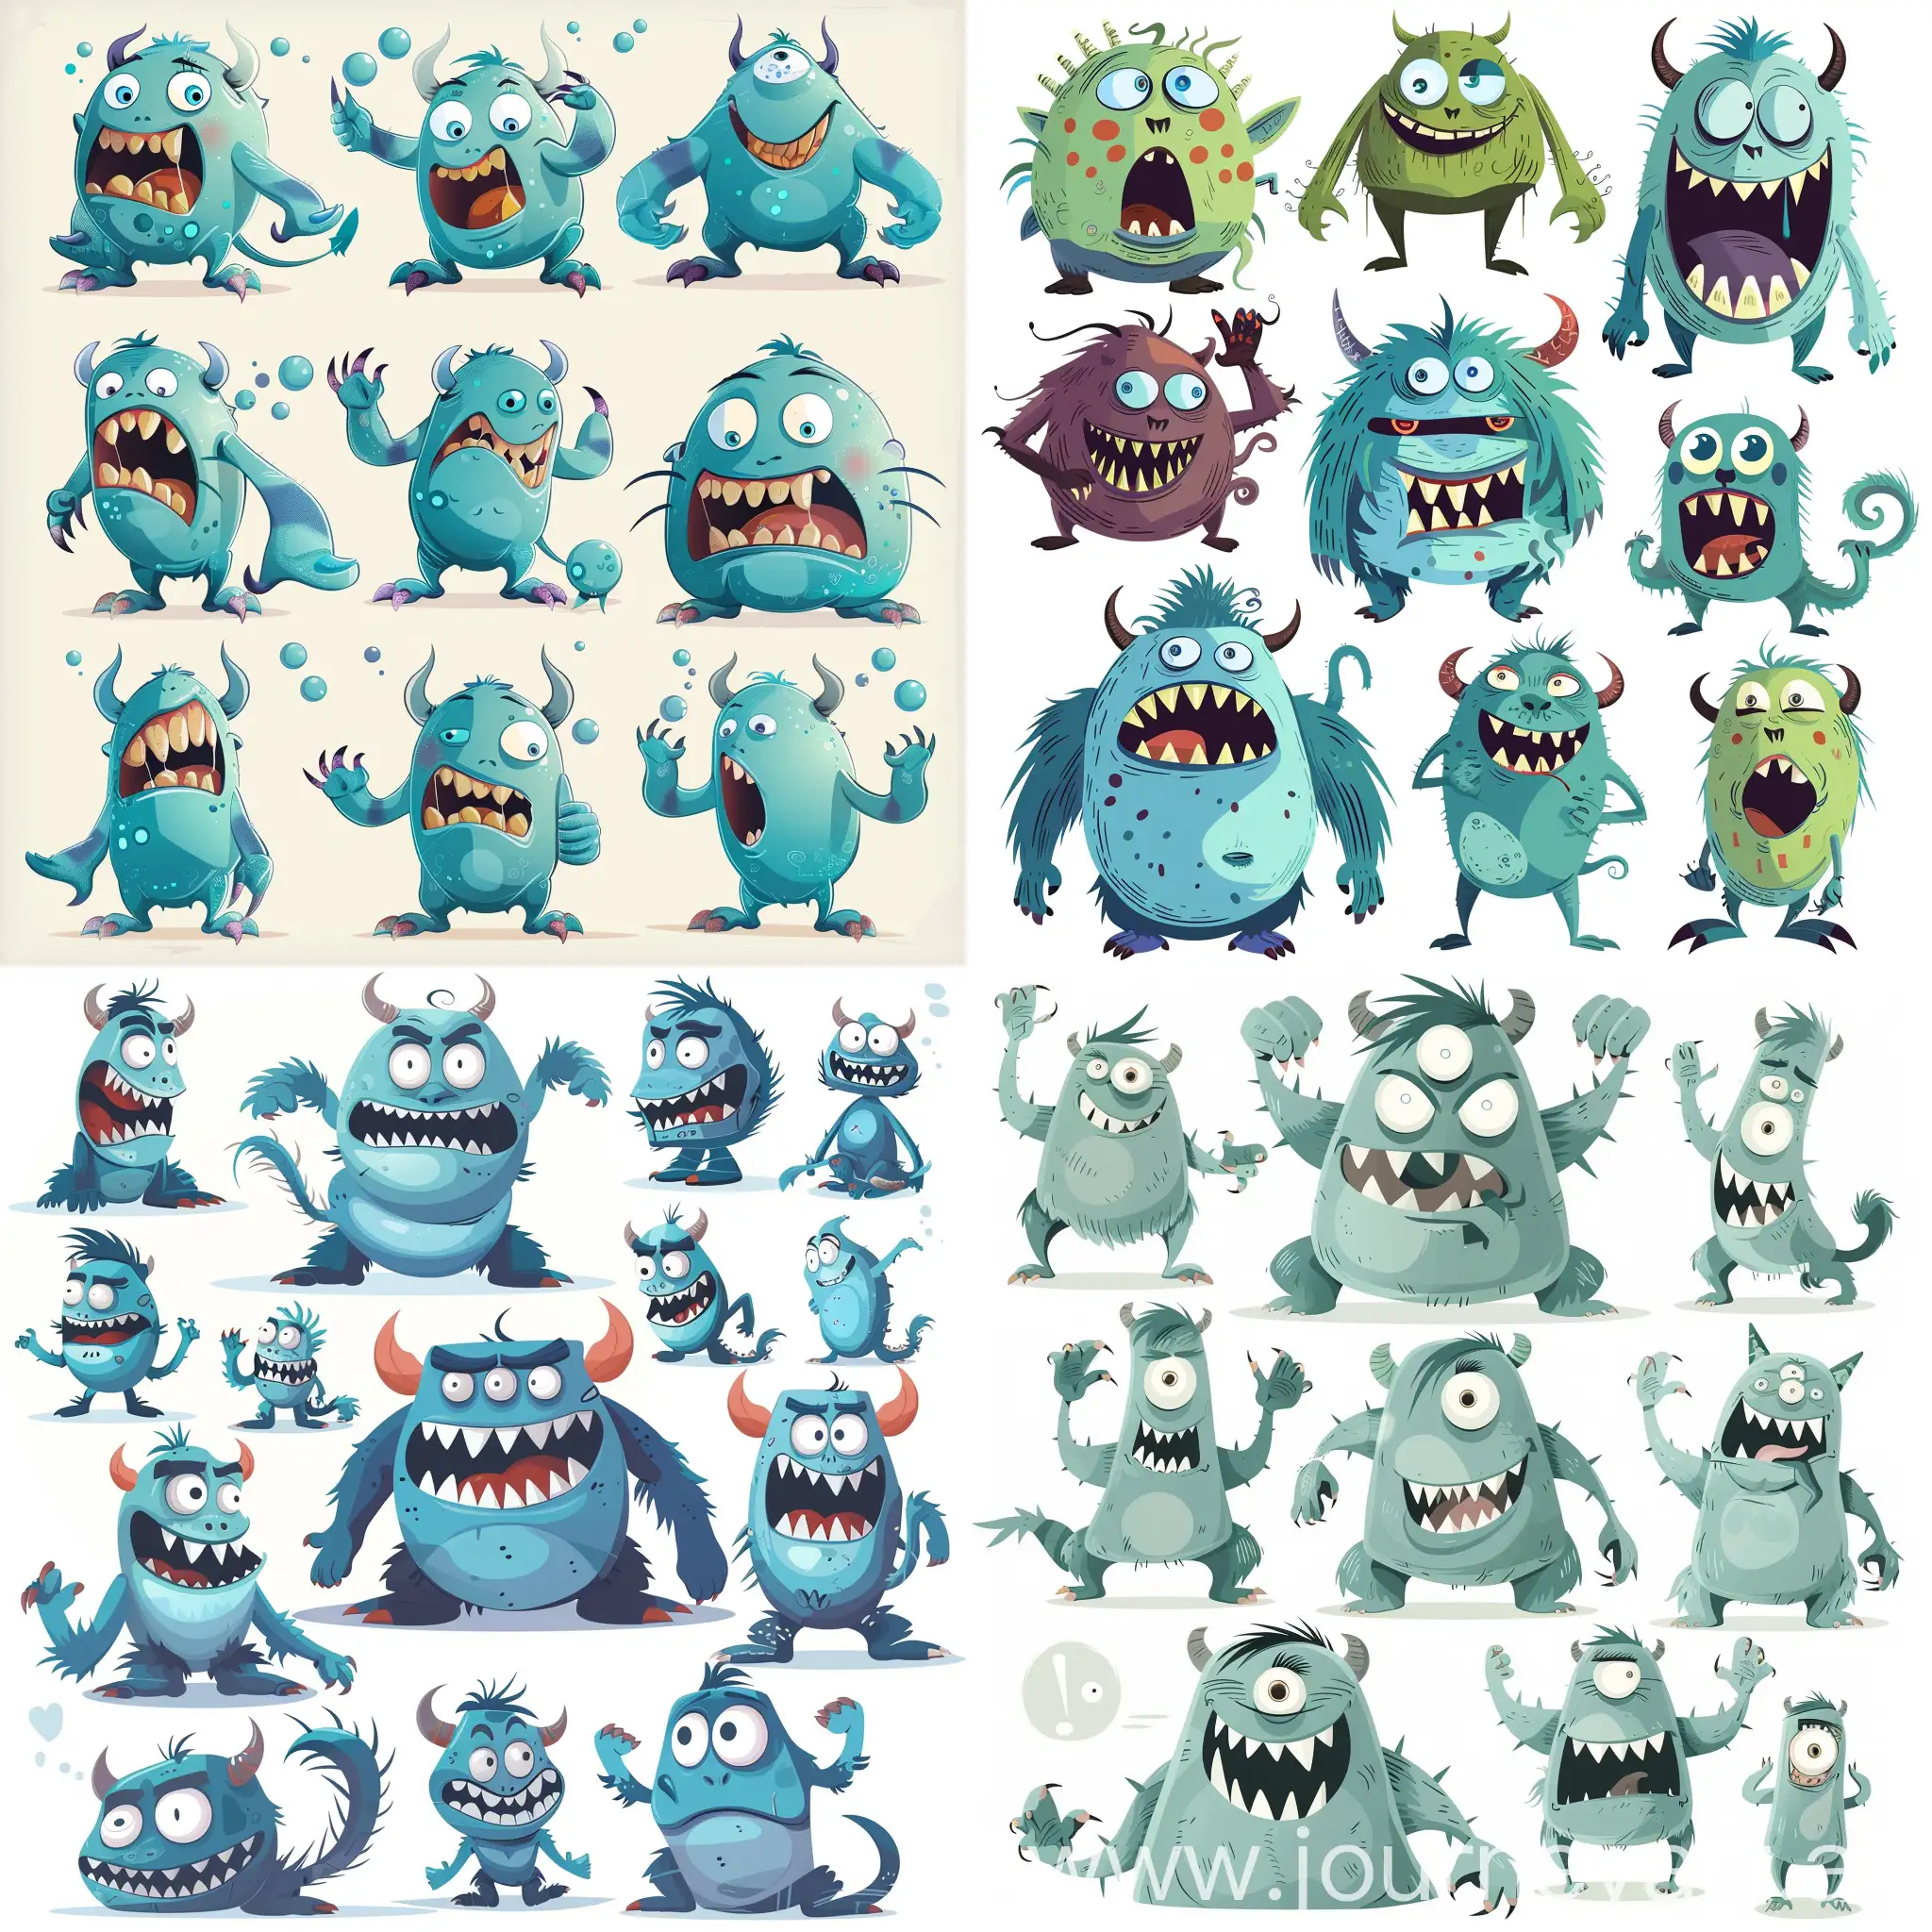 cartoon cute monsters, multiple poses and expressions, in high quality vector style